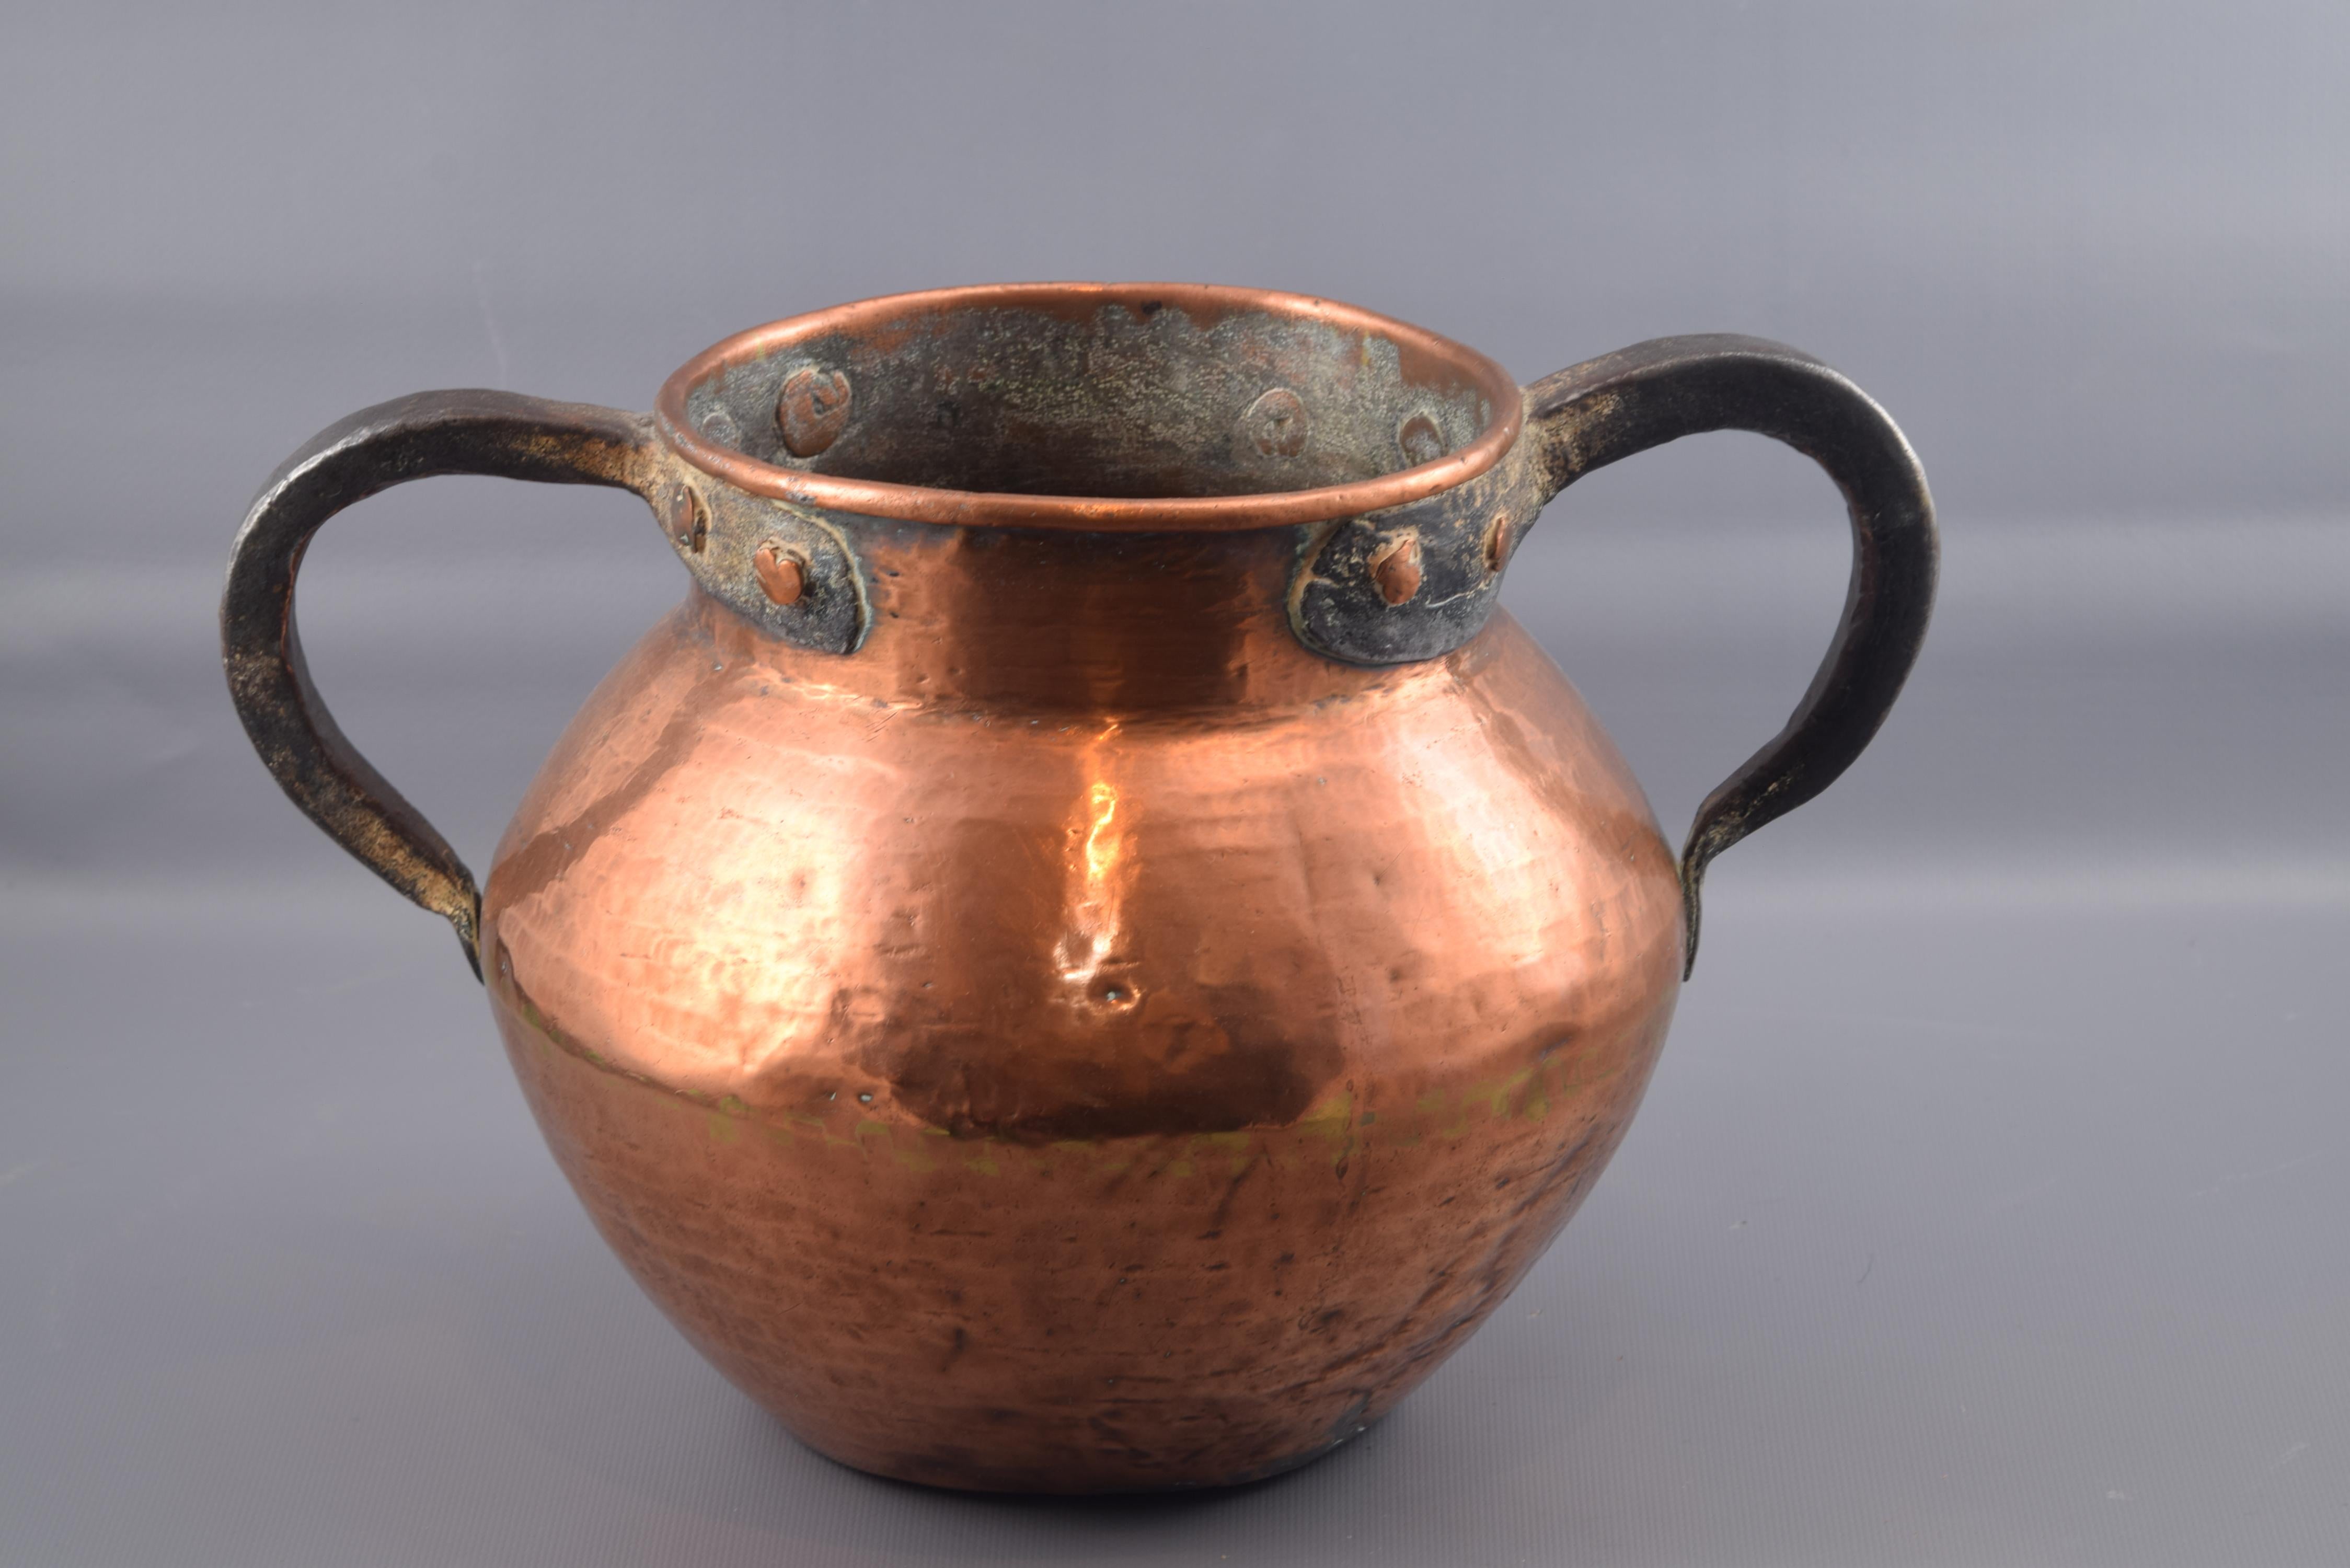 Neoclassical Copper Container with Two Handles, 18th Century